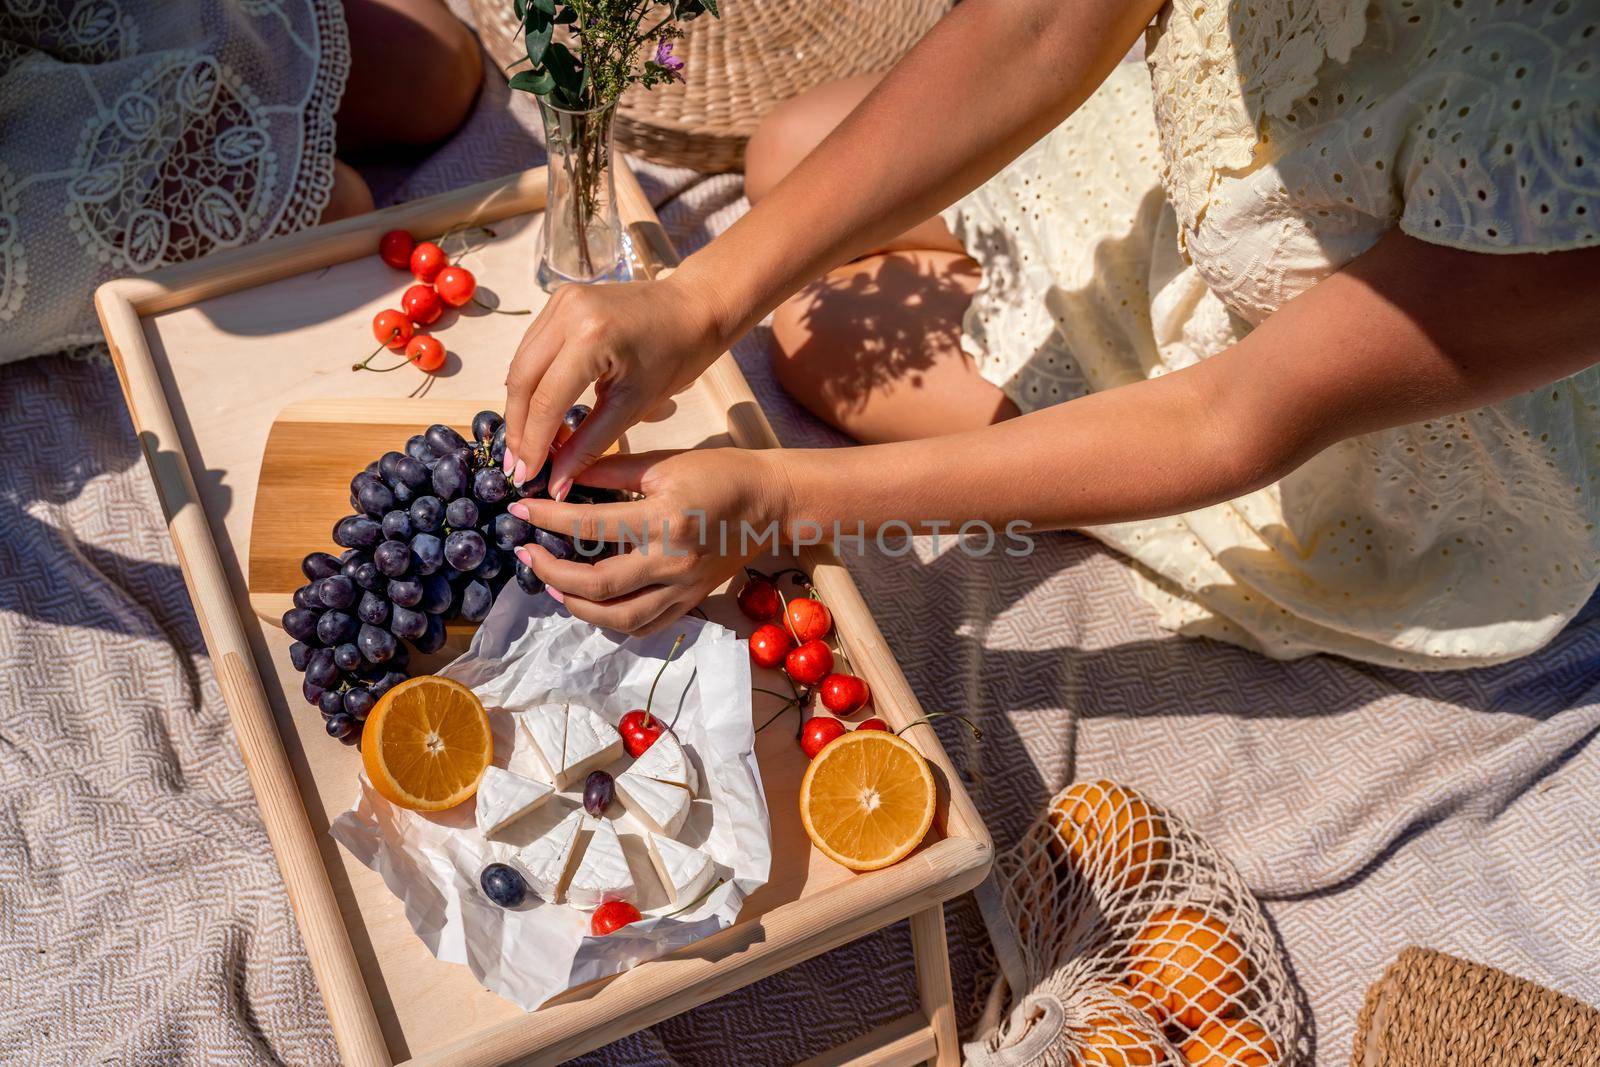 Romantic picnic for two with fruit, bread and cheese. Oranges, cherries, black grapes and camembert on a wooden table. The girl's hands with a manicure tear off a grape berry sitting on a light blanket